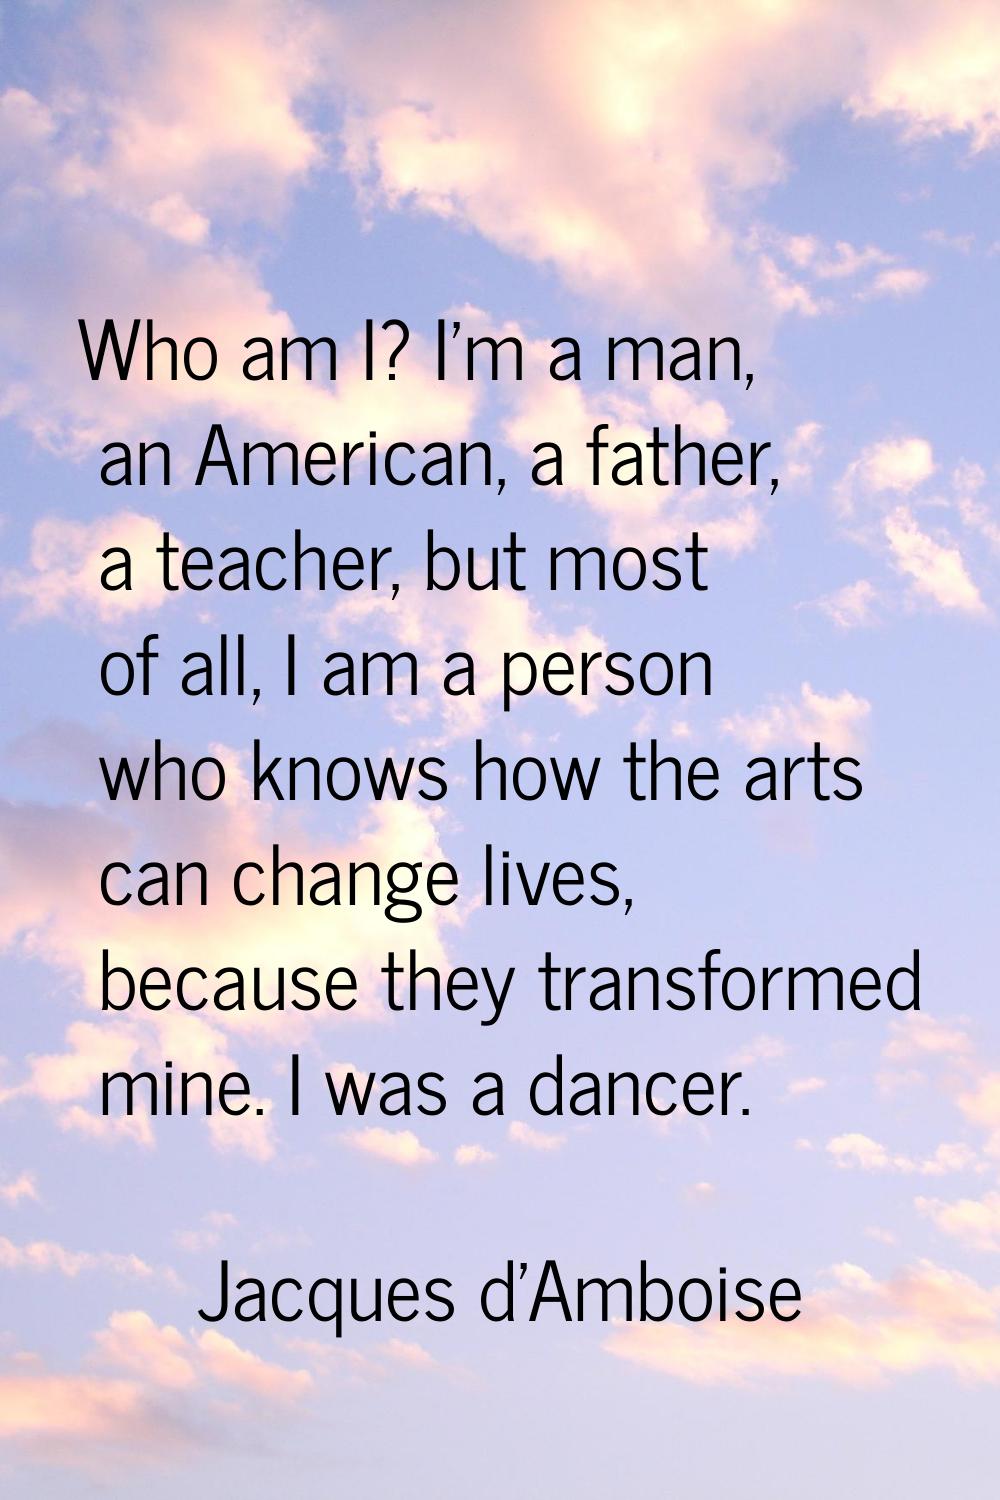 Who am I? I'm a man, an American, a father, a teacher, but most of all, I am a person who knows how